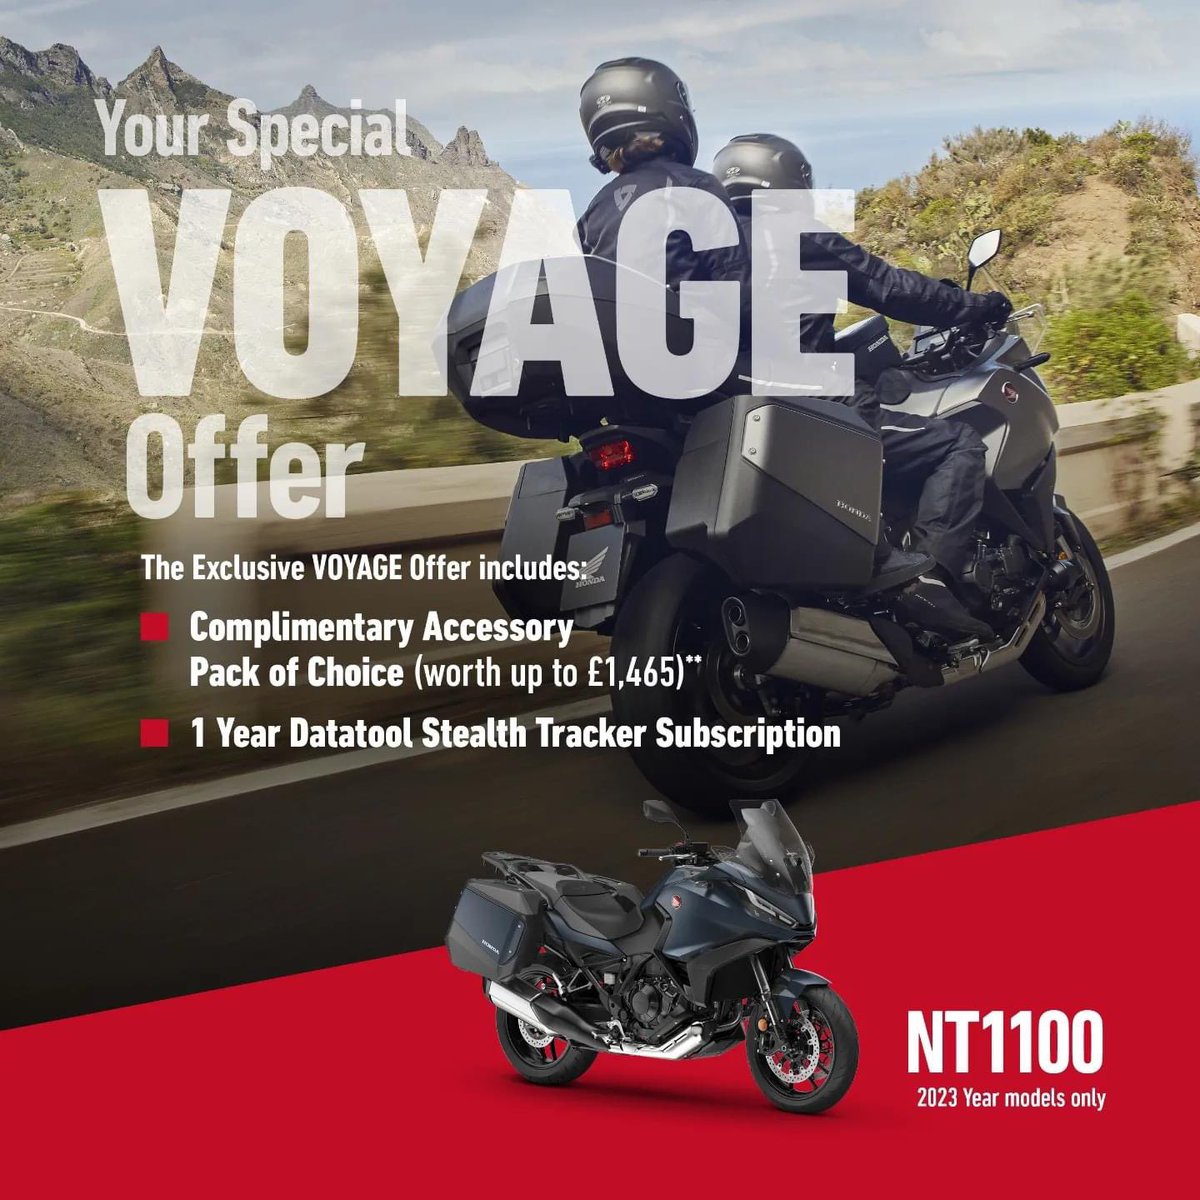 There’s never been a better time to bag yourself a bargain. We’re now offering a genuine Honda Voyage accessories pack completely FREE on new #Honda #NT1100s, but only while current stocks last. Call us FREE on 📞 0800 975 2669 today #WeAreBikers